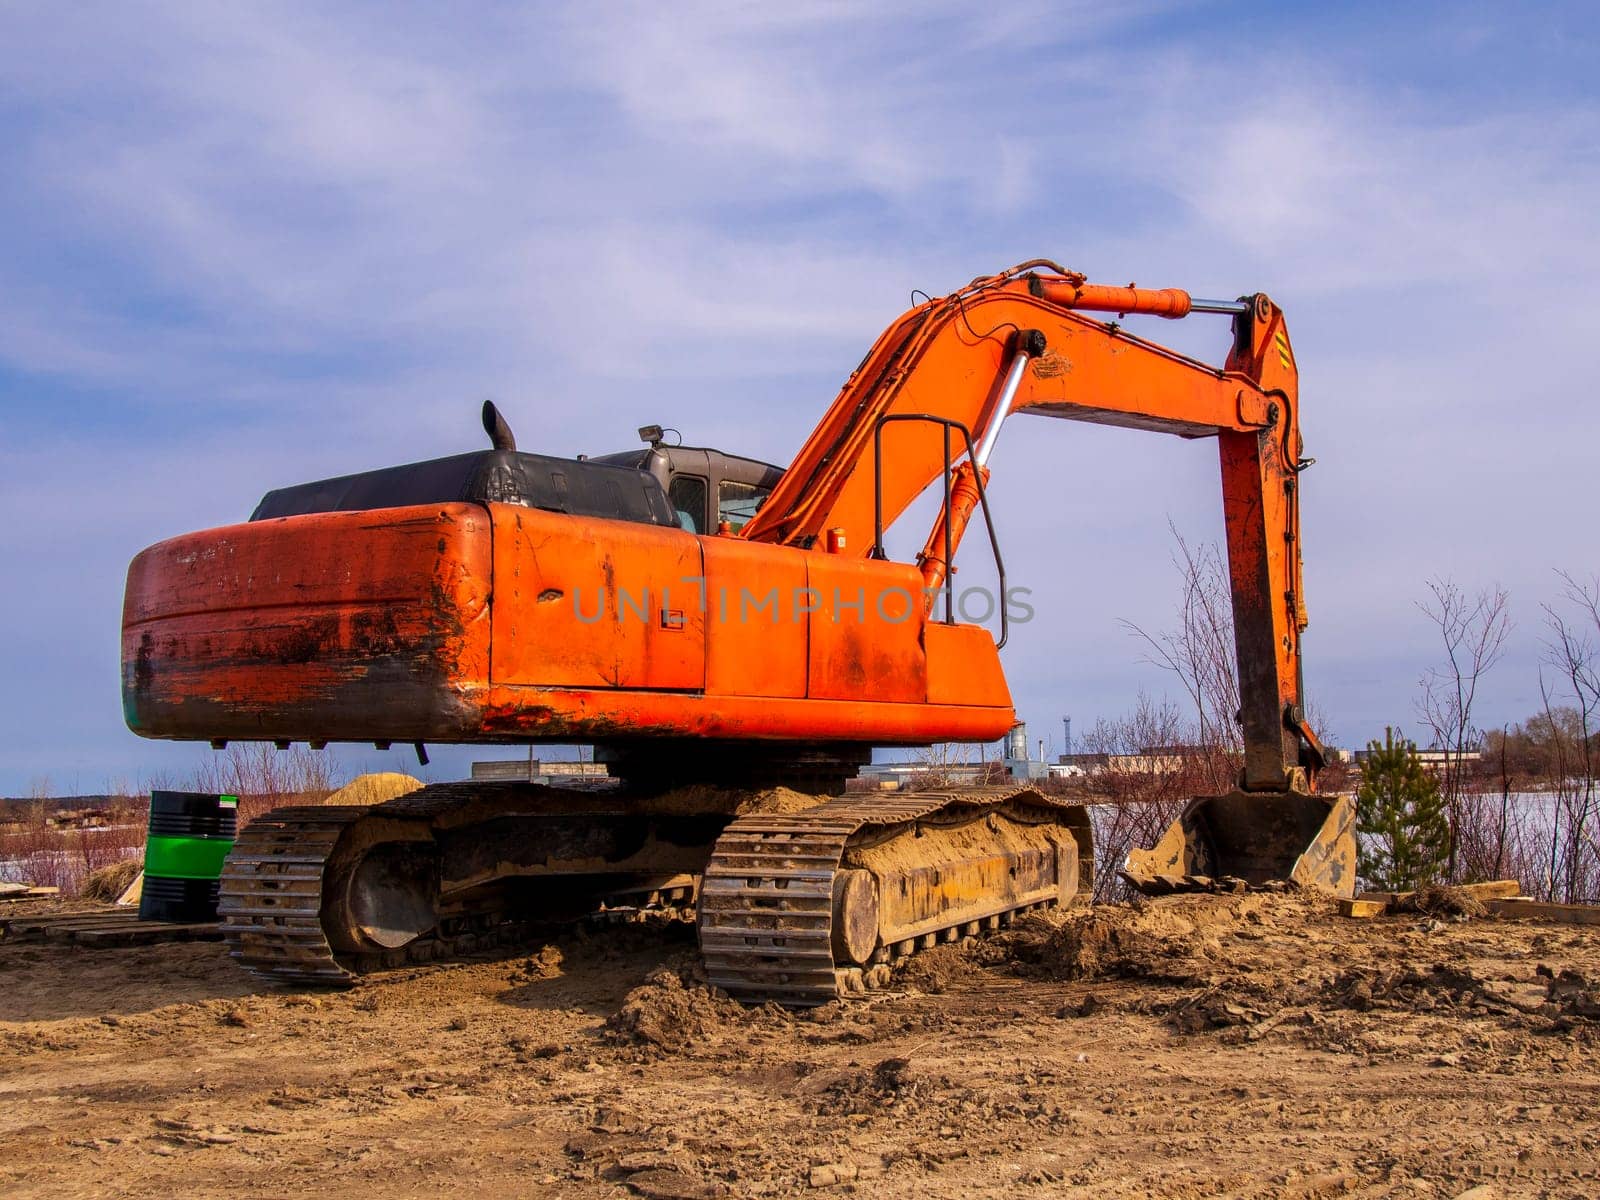 Powerful orange excavator in rural area by Andre1ns